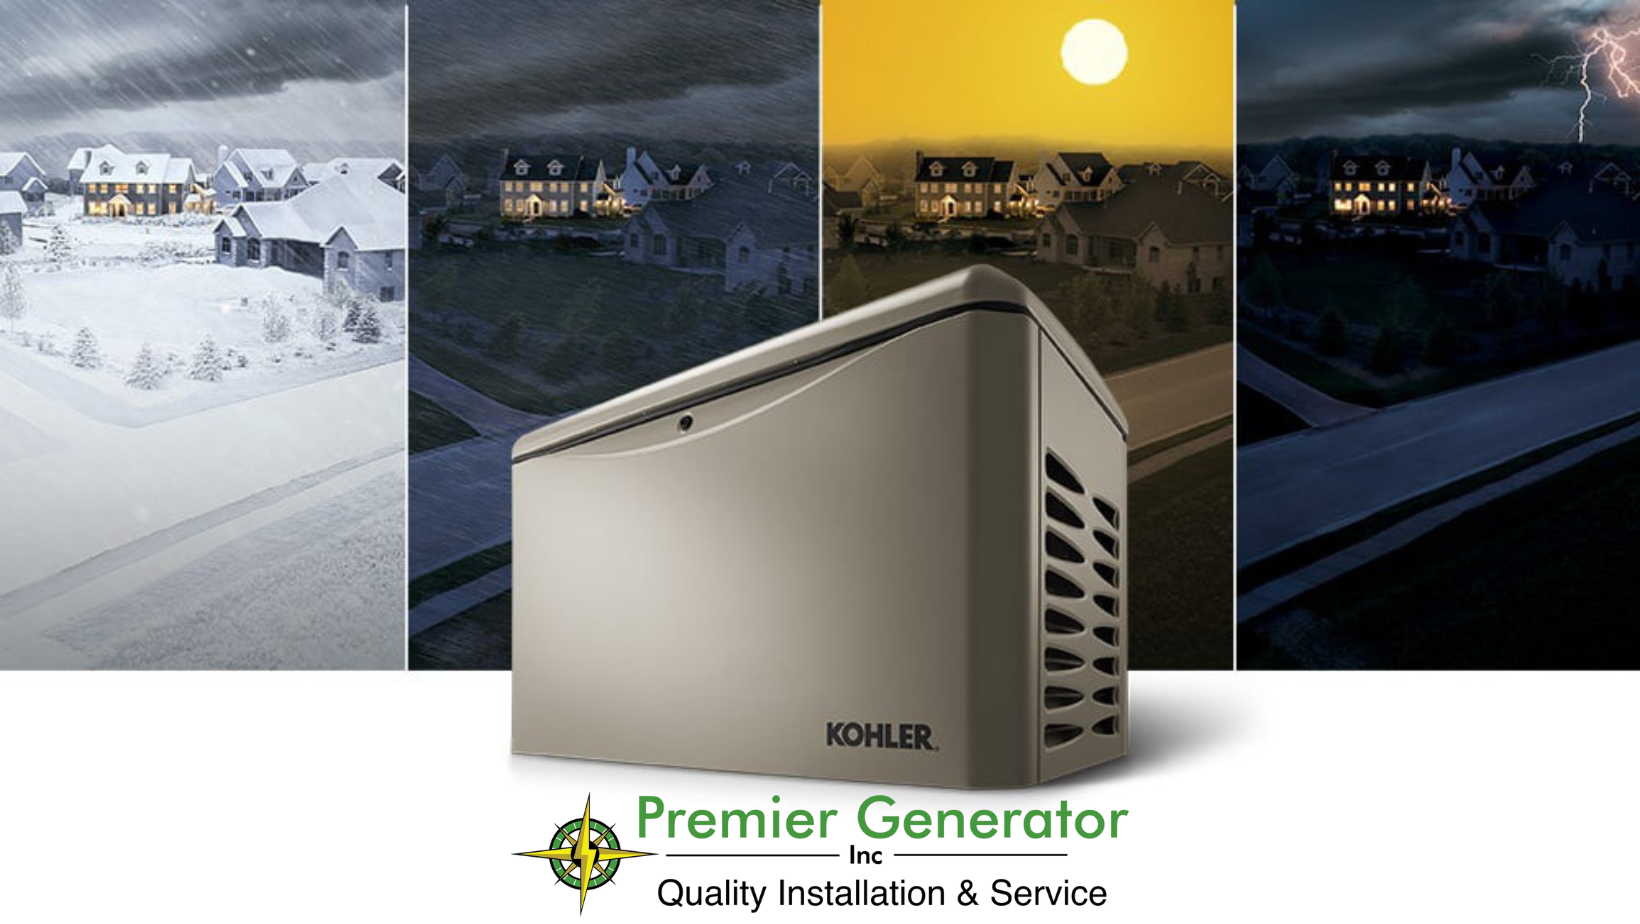 Home standby generators with an automatic transfer switch, keeping you connected during a power outage